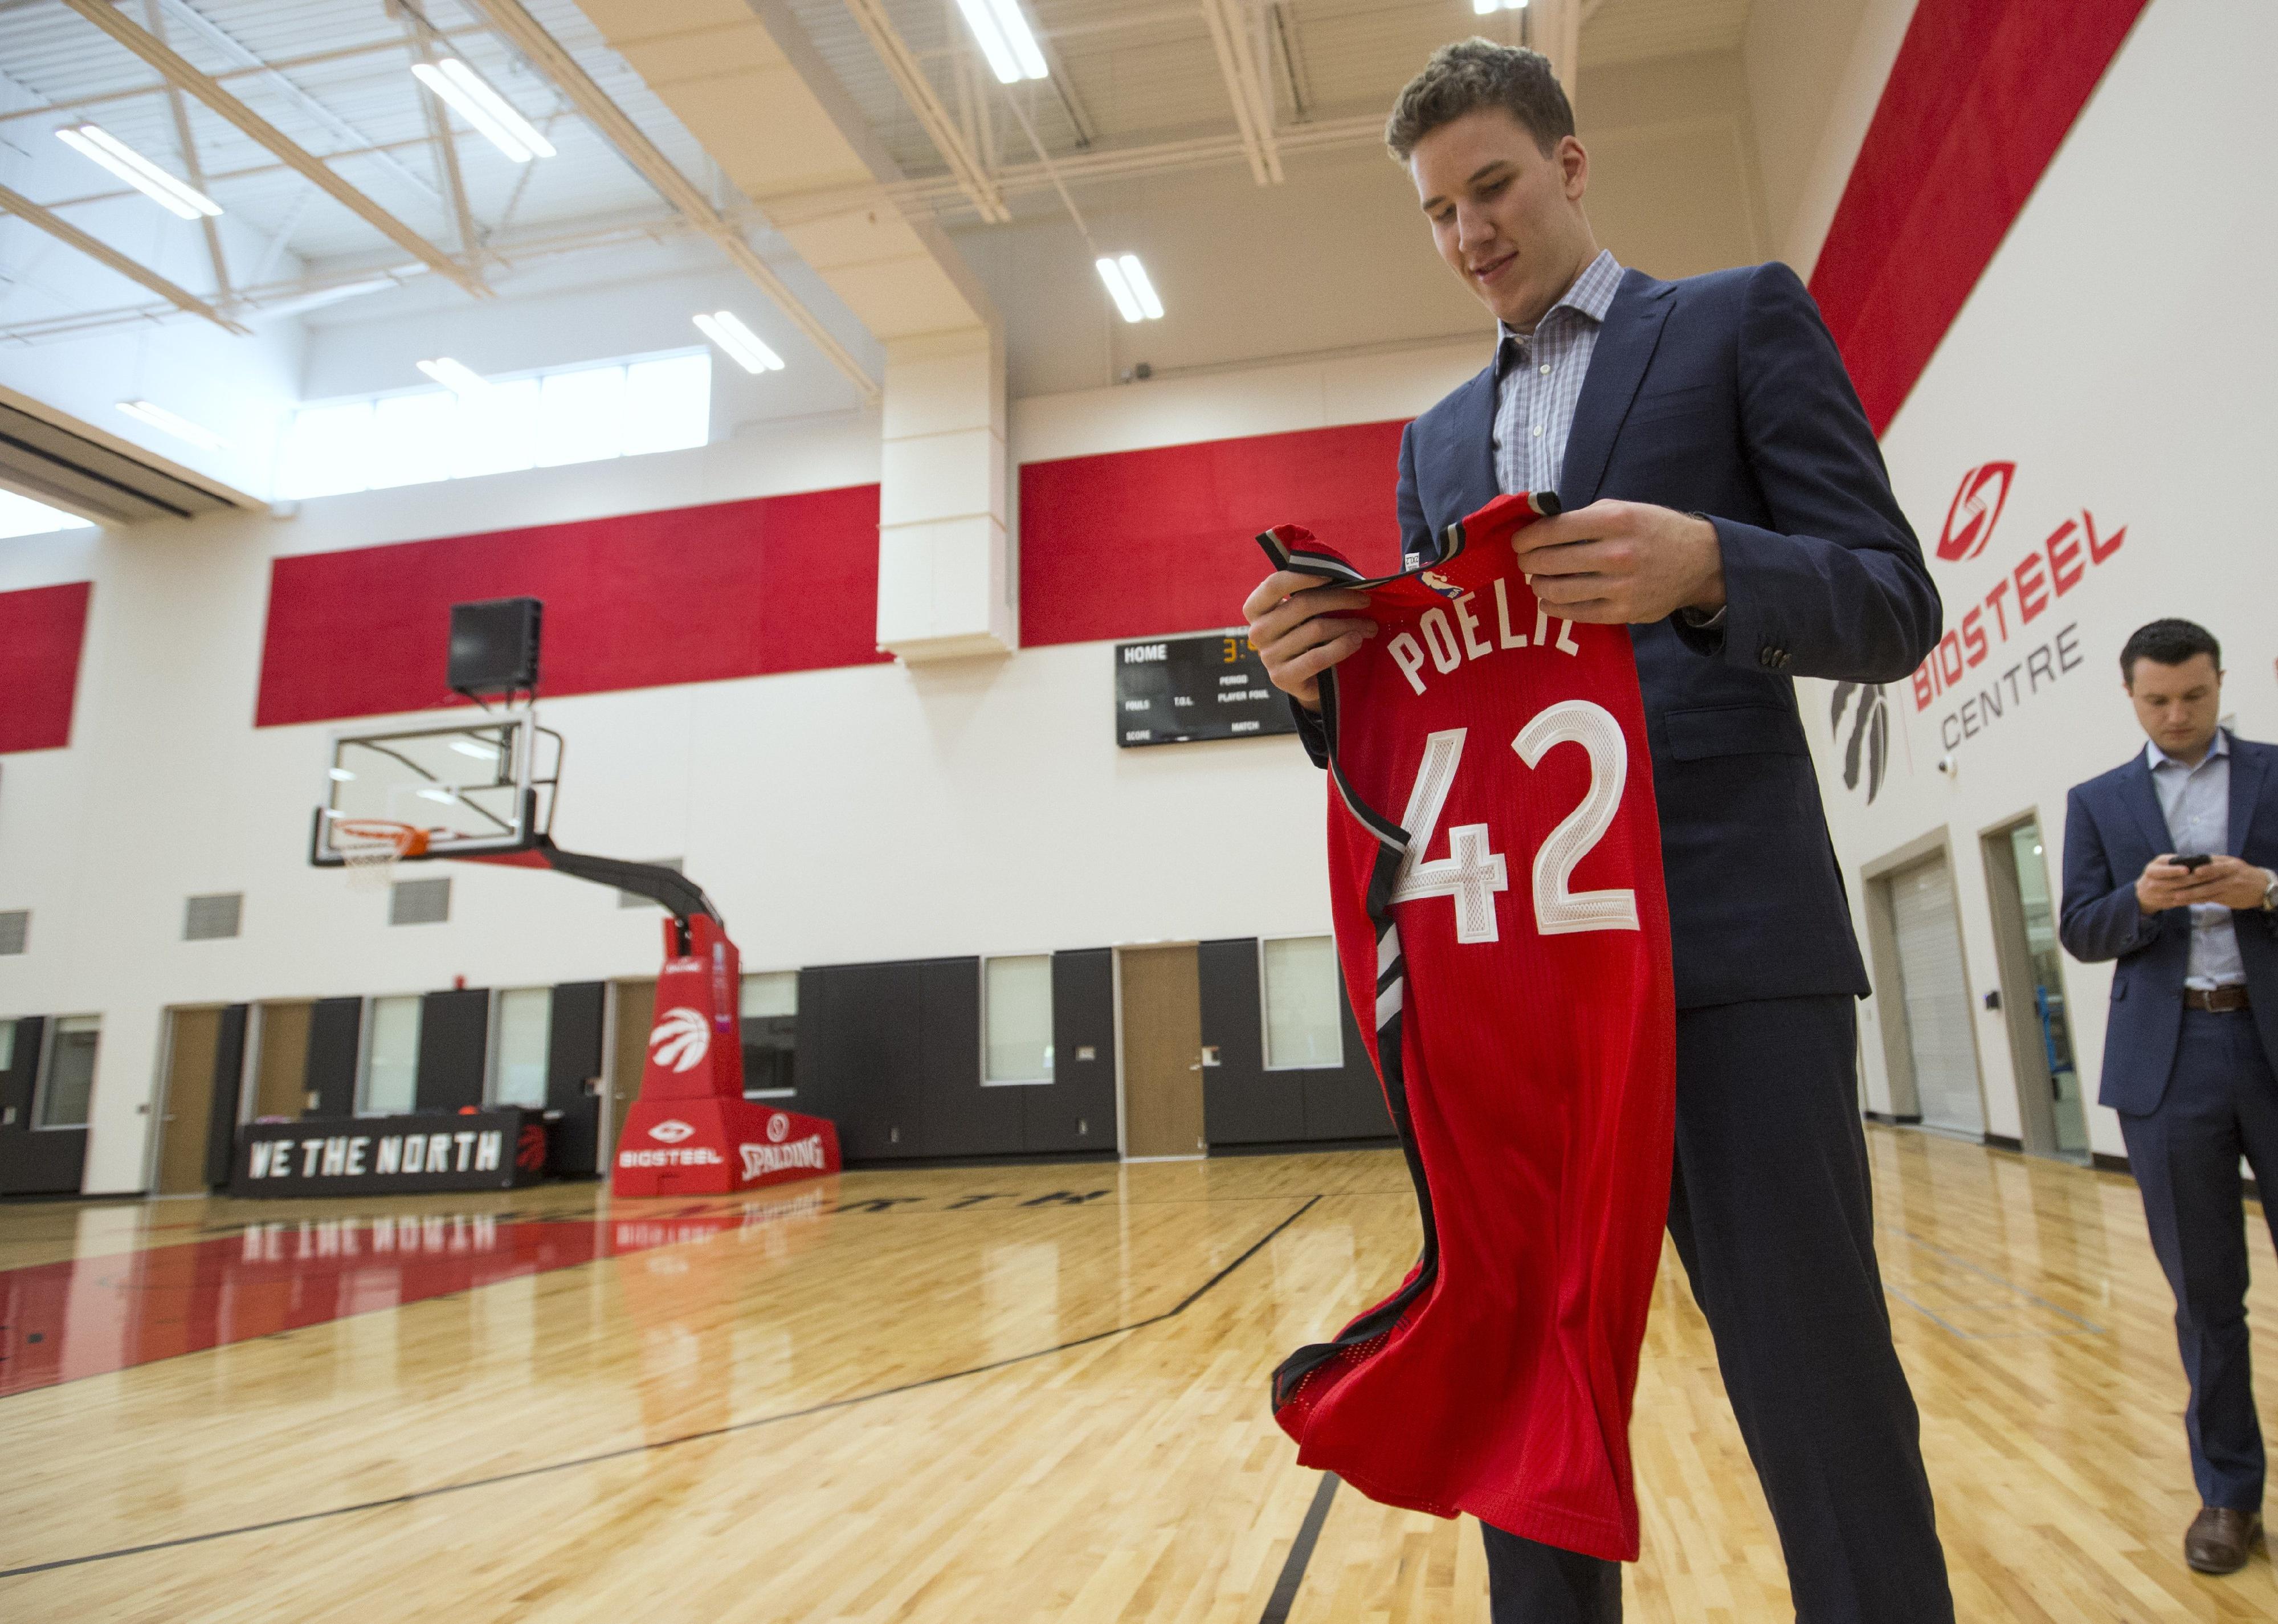 Jakob Poeltl looking at his jersey in a gym at BioSteel Centre.